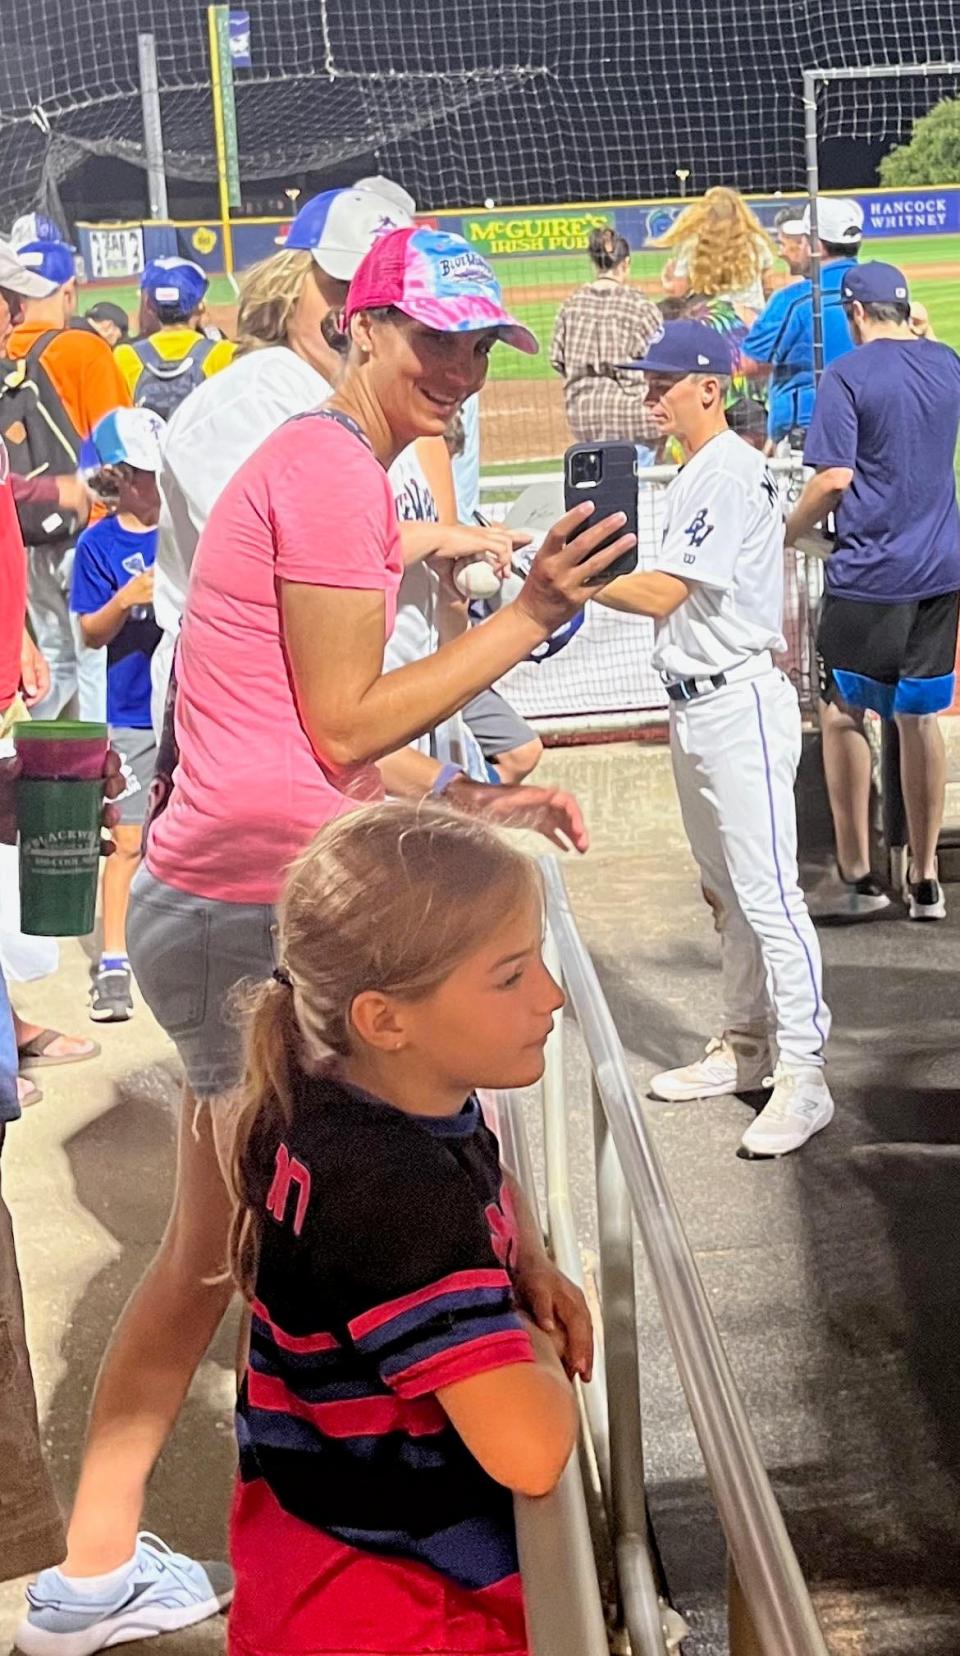 Cody Morissette, a 2018 graduate of Exeter High School, signs autographs prior to a Double-A baseball game between the Pensacola Blue Wahoos and the Mississippi Braves in Pensacola, Florida last summer.